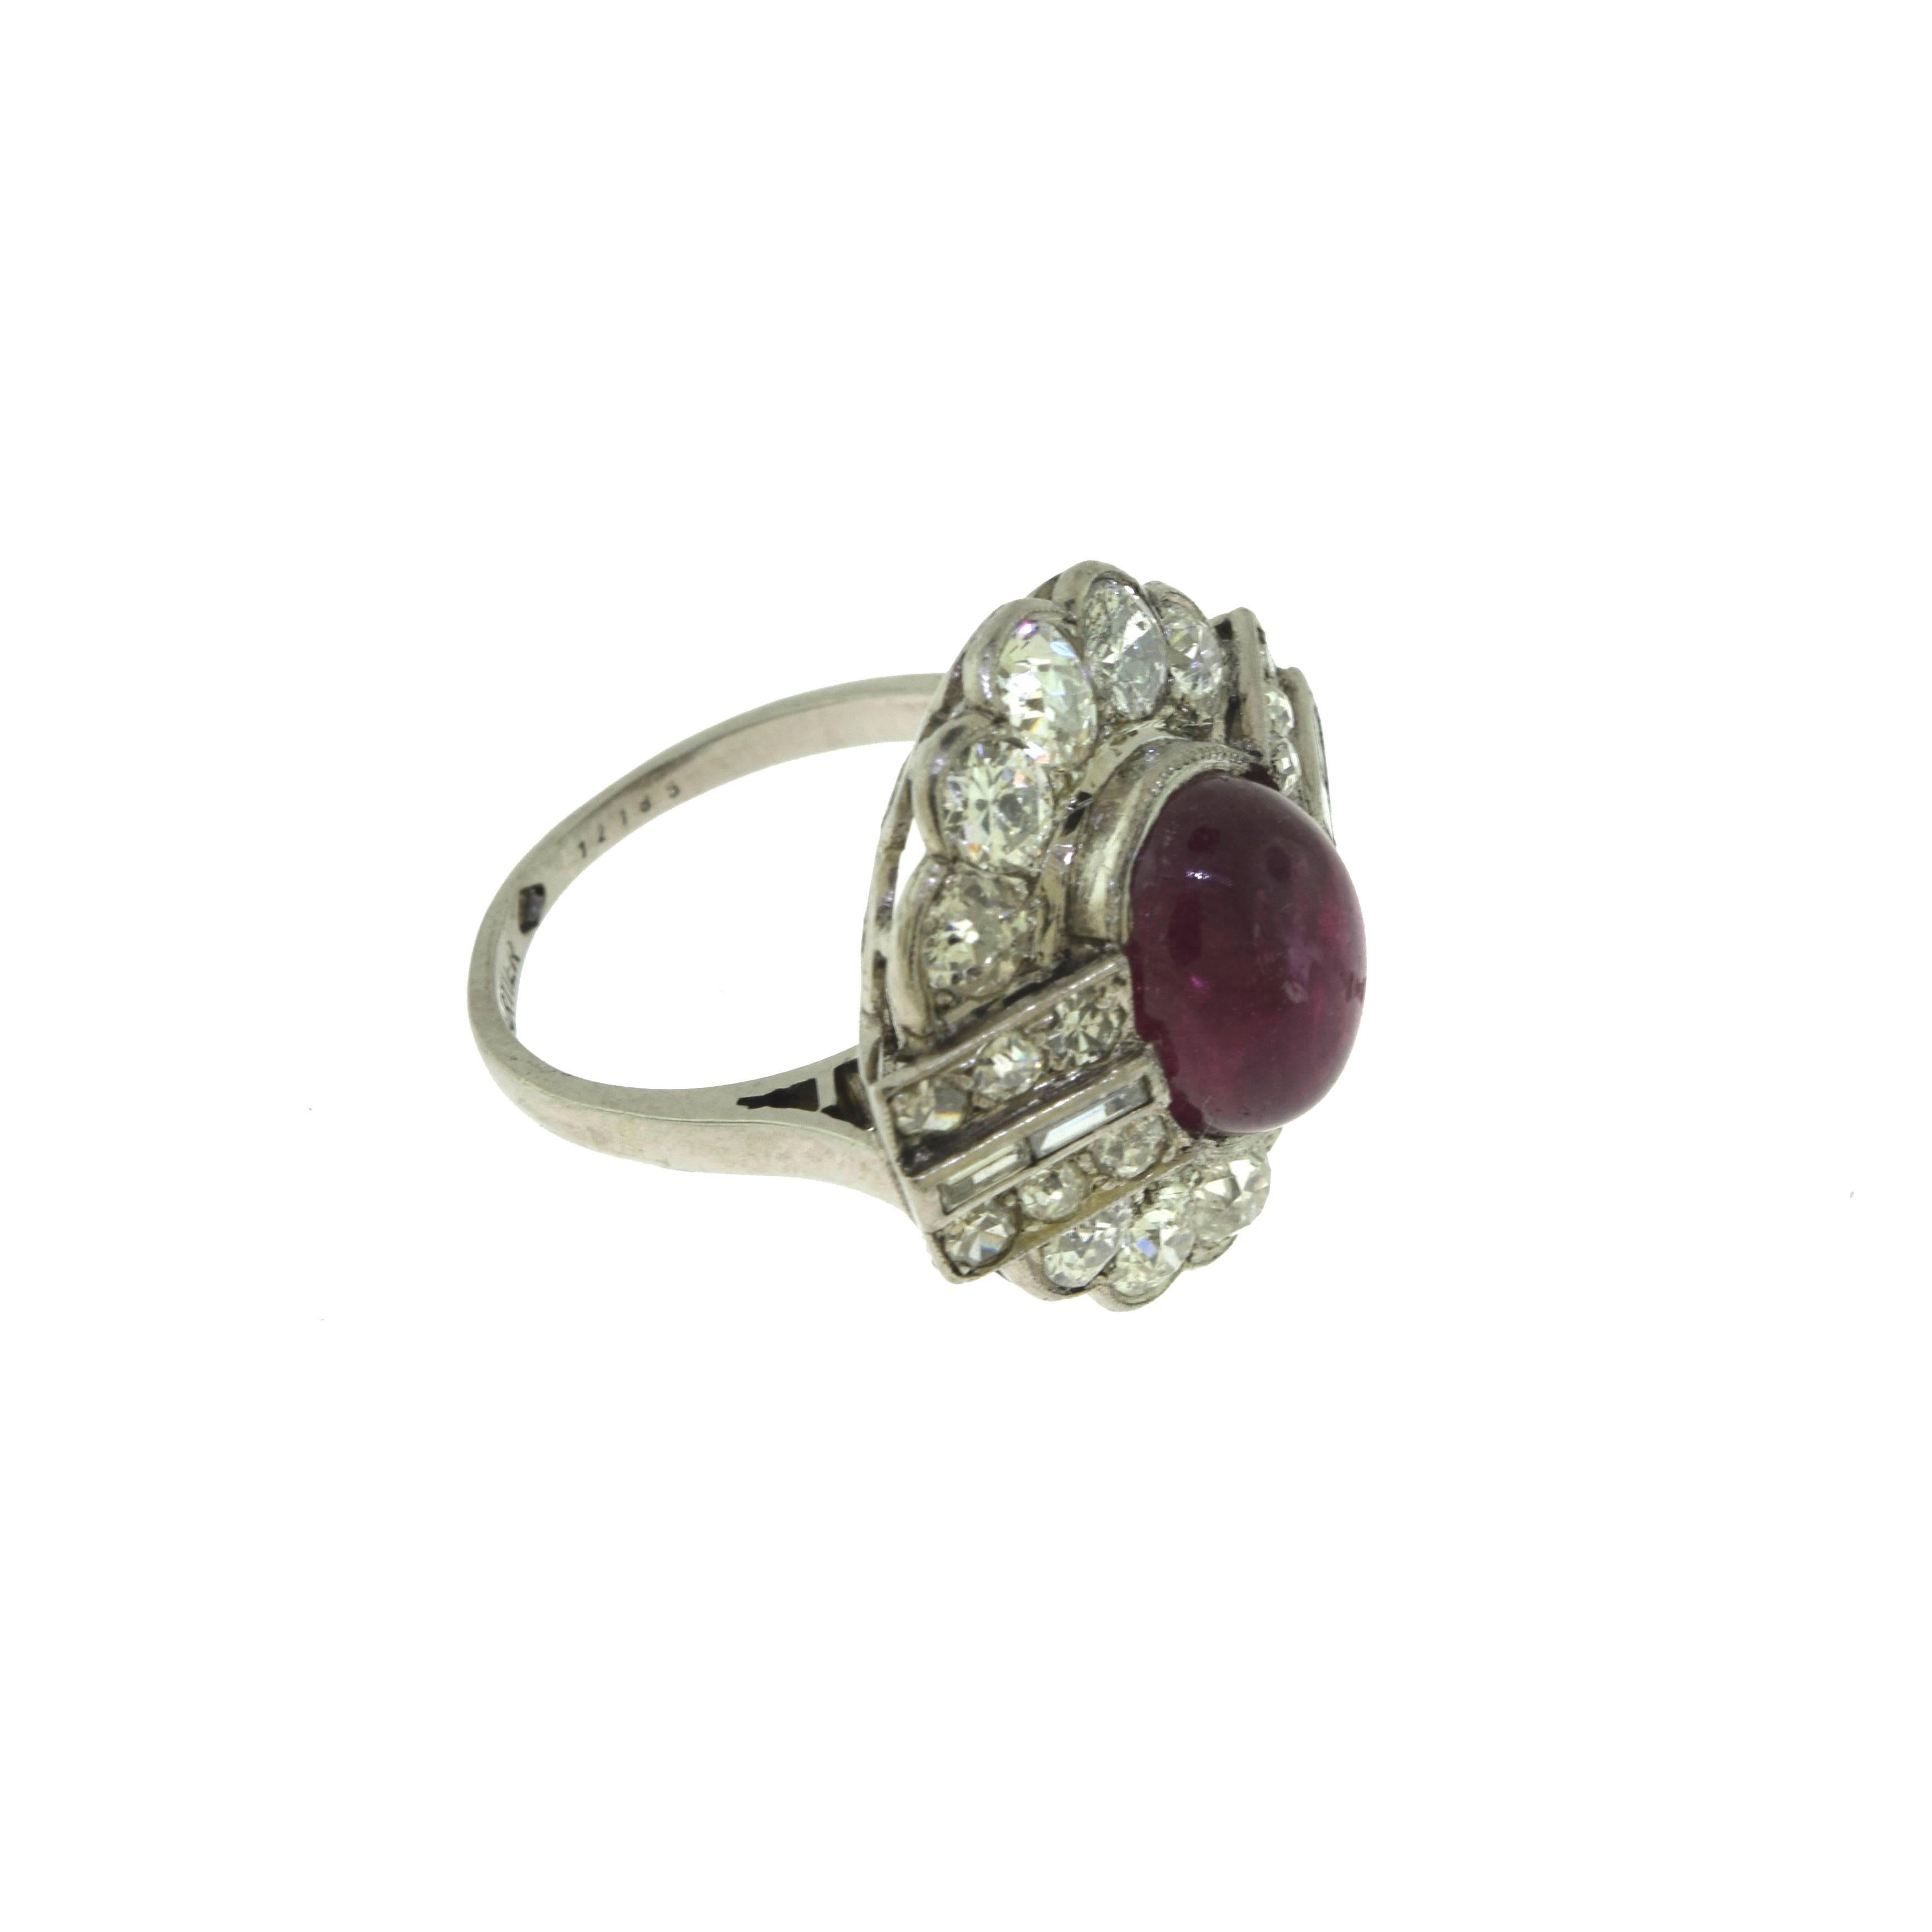 1930s Antique Cartier Platinum 3 ct Ruby and 3.2 ct Diamond Cocktail Ring In Excellent Condition For Sale In Miami, FL